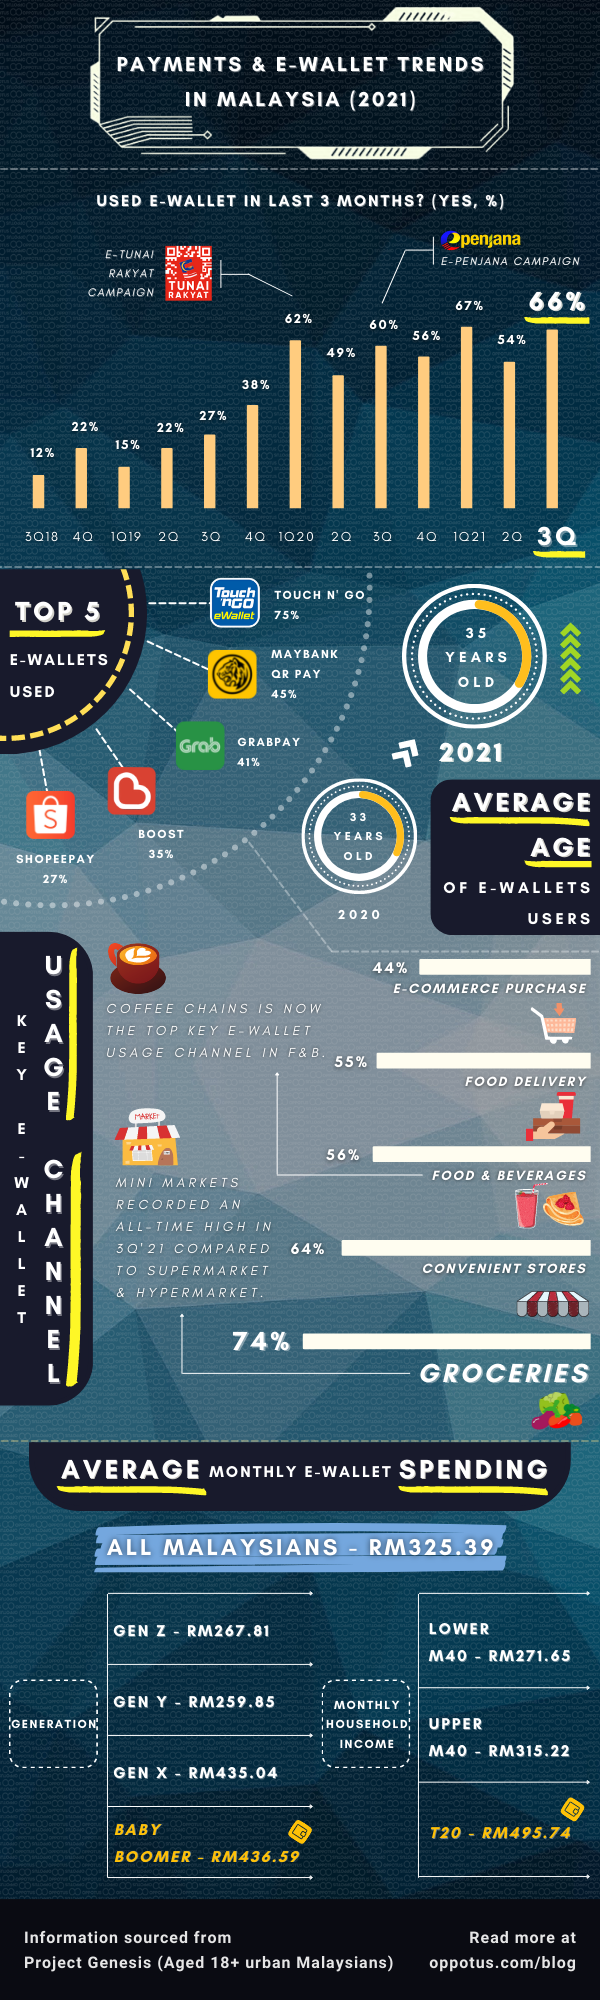 Malaysian e-wallet usage 2021 infographic